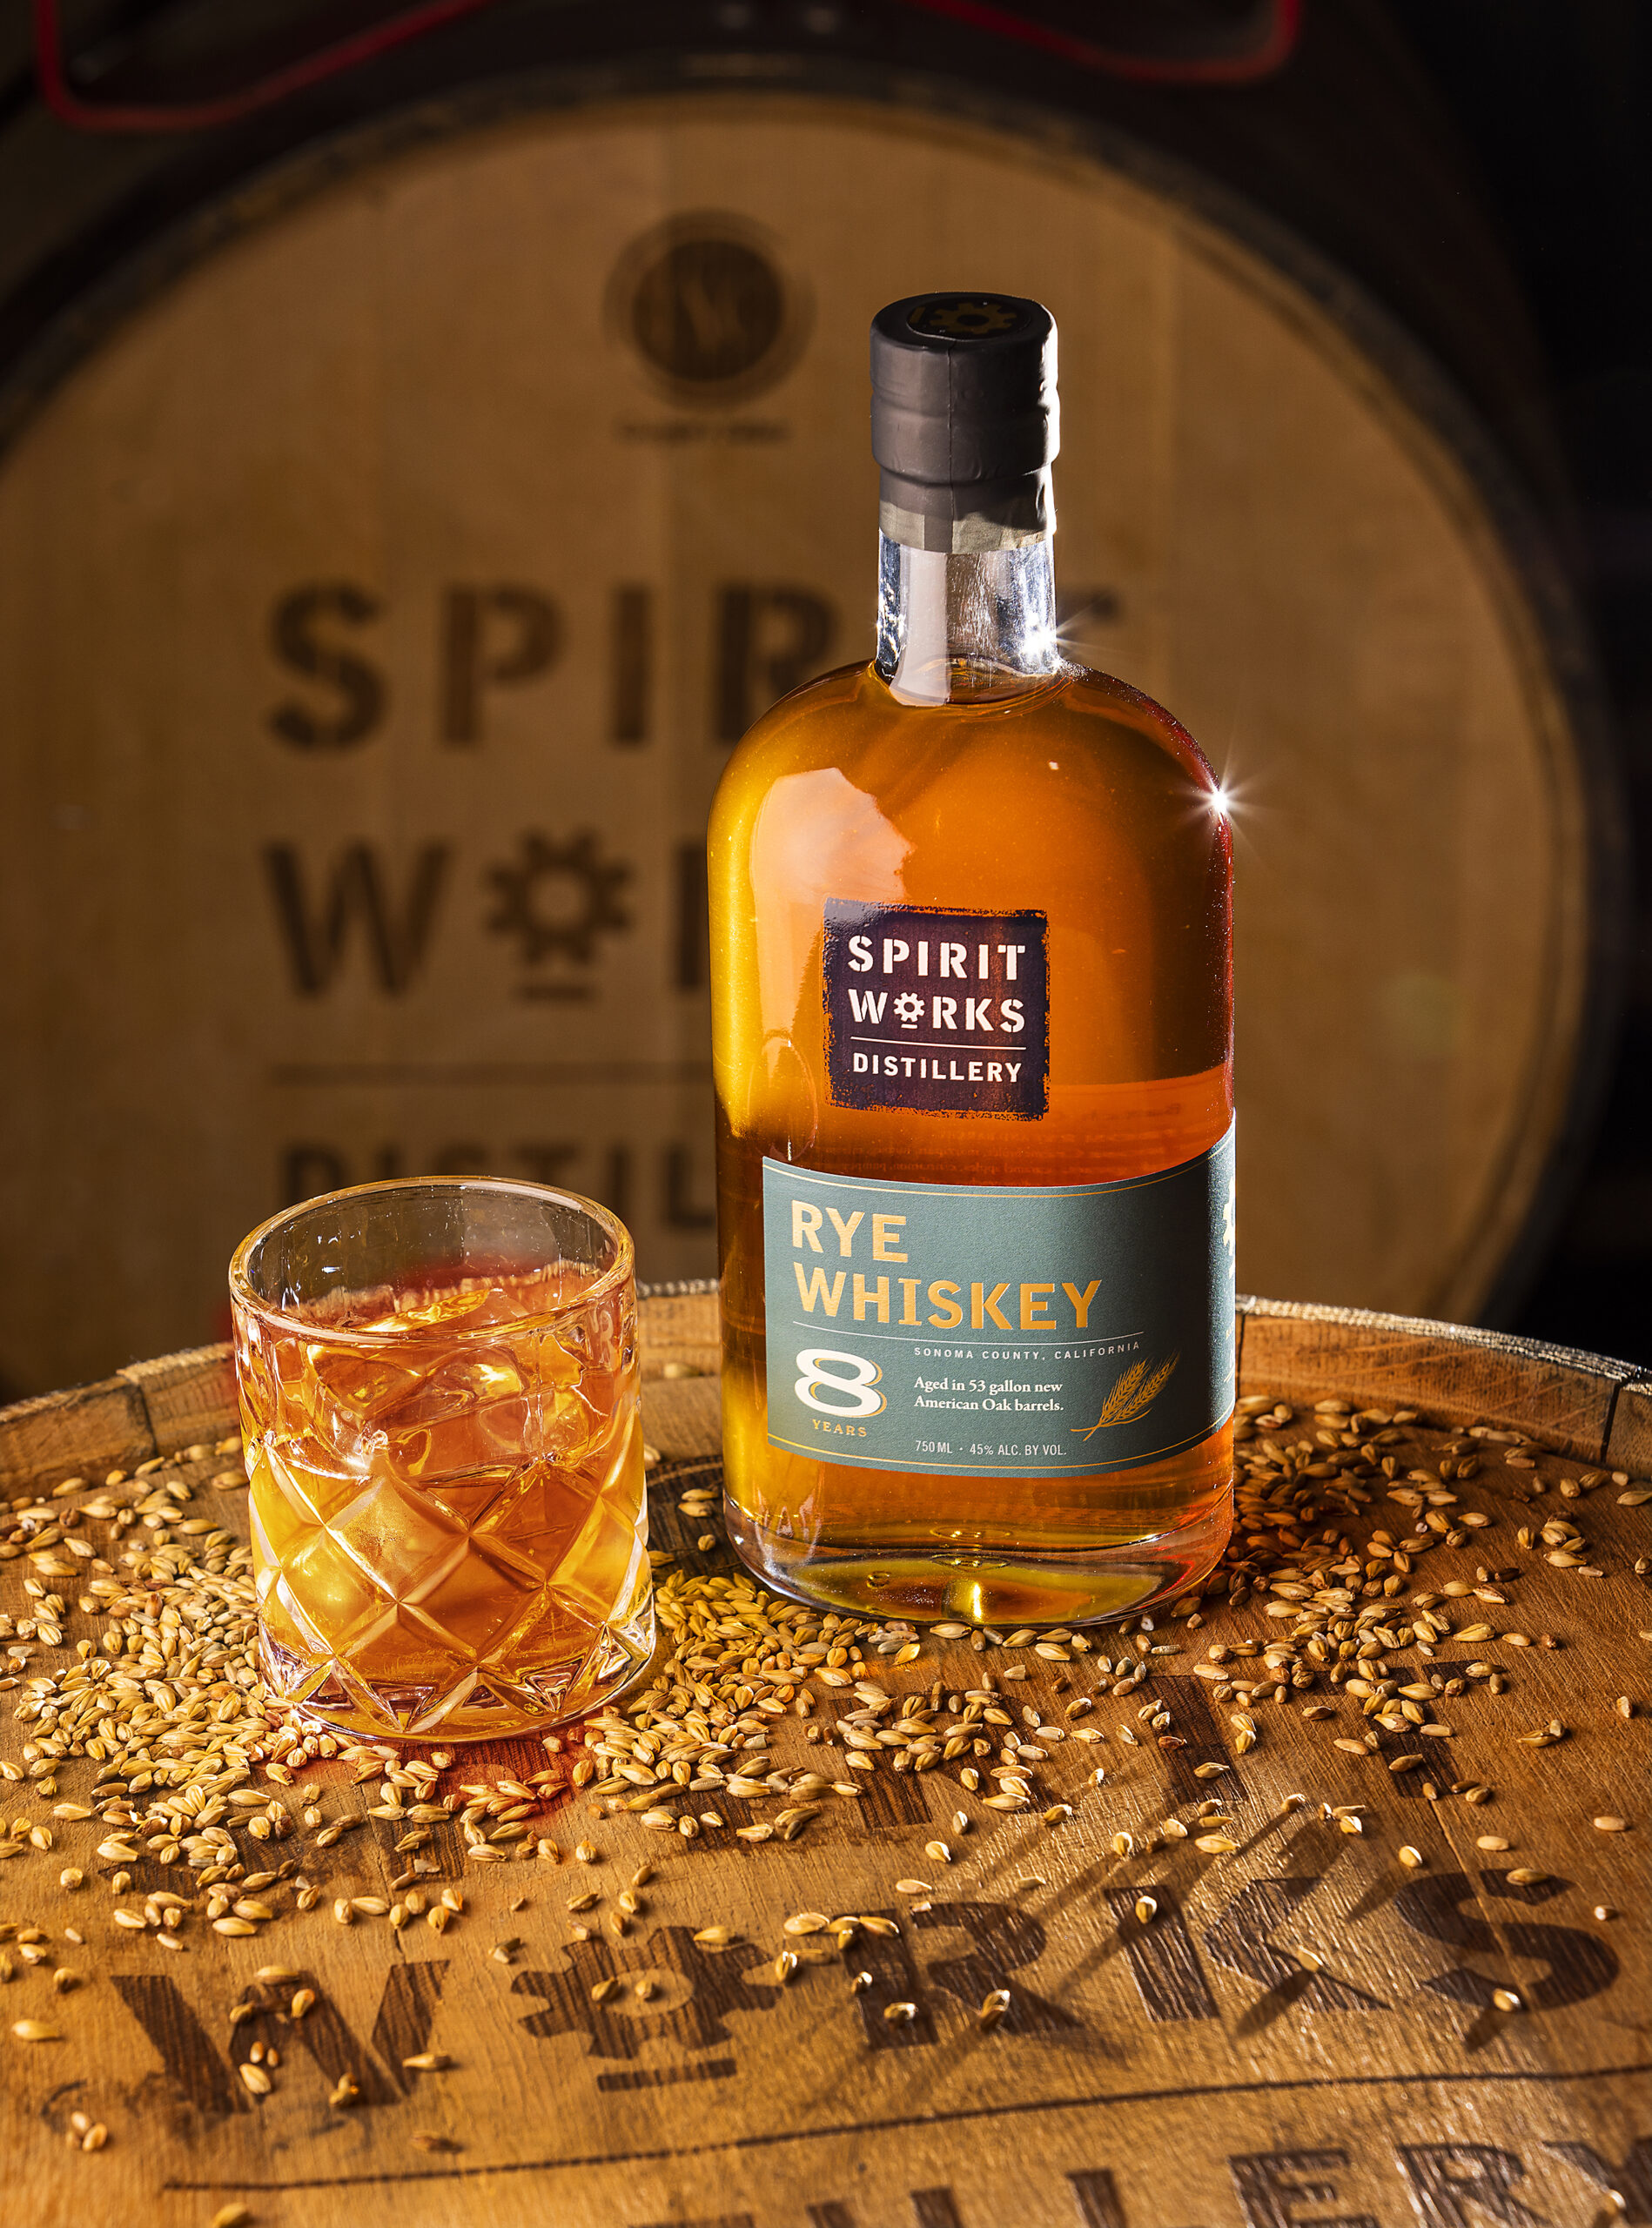 Spirit Works Distillery are celebrating their 10-year anniversary in SebastopolÕs Barlow with the release of an 8 year old rye whiskey September 30, 2022. (John Burgess/The Press Democrat)